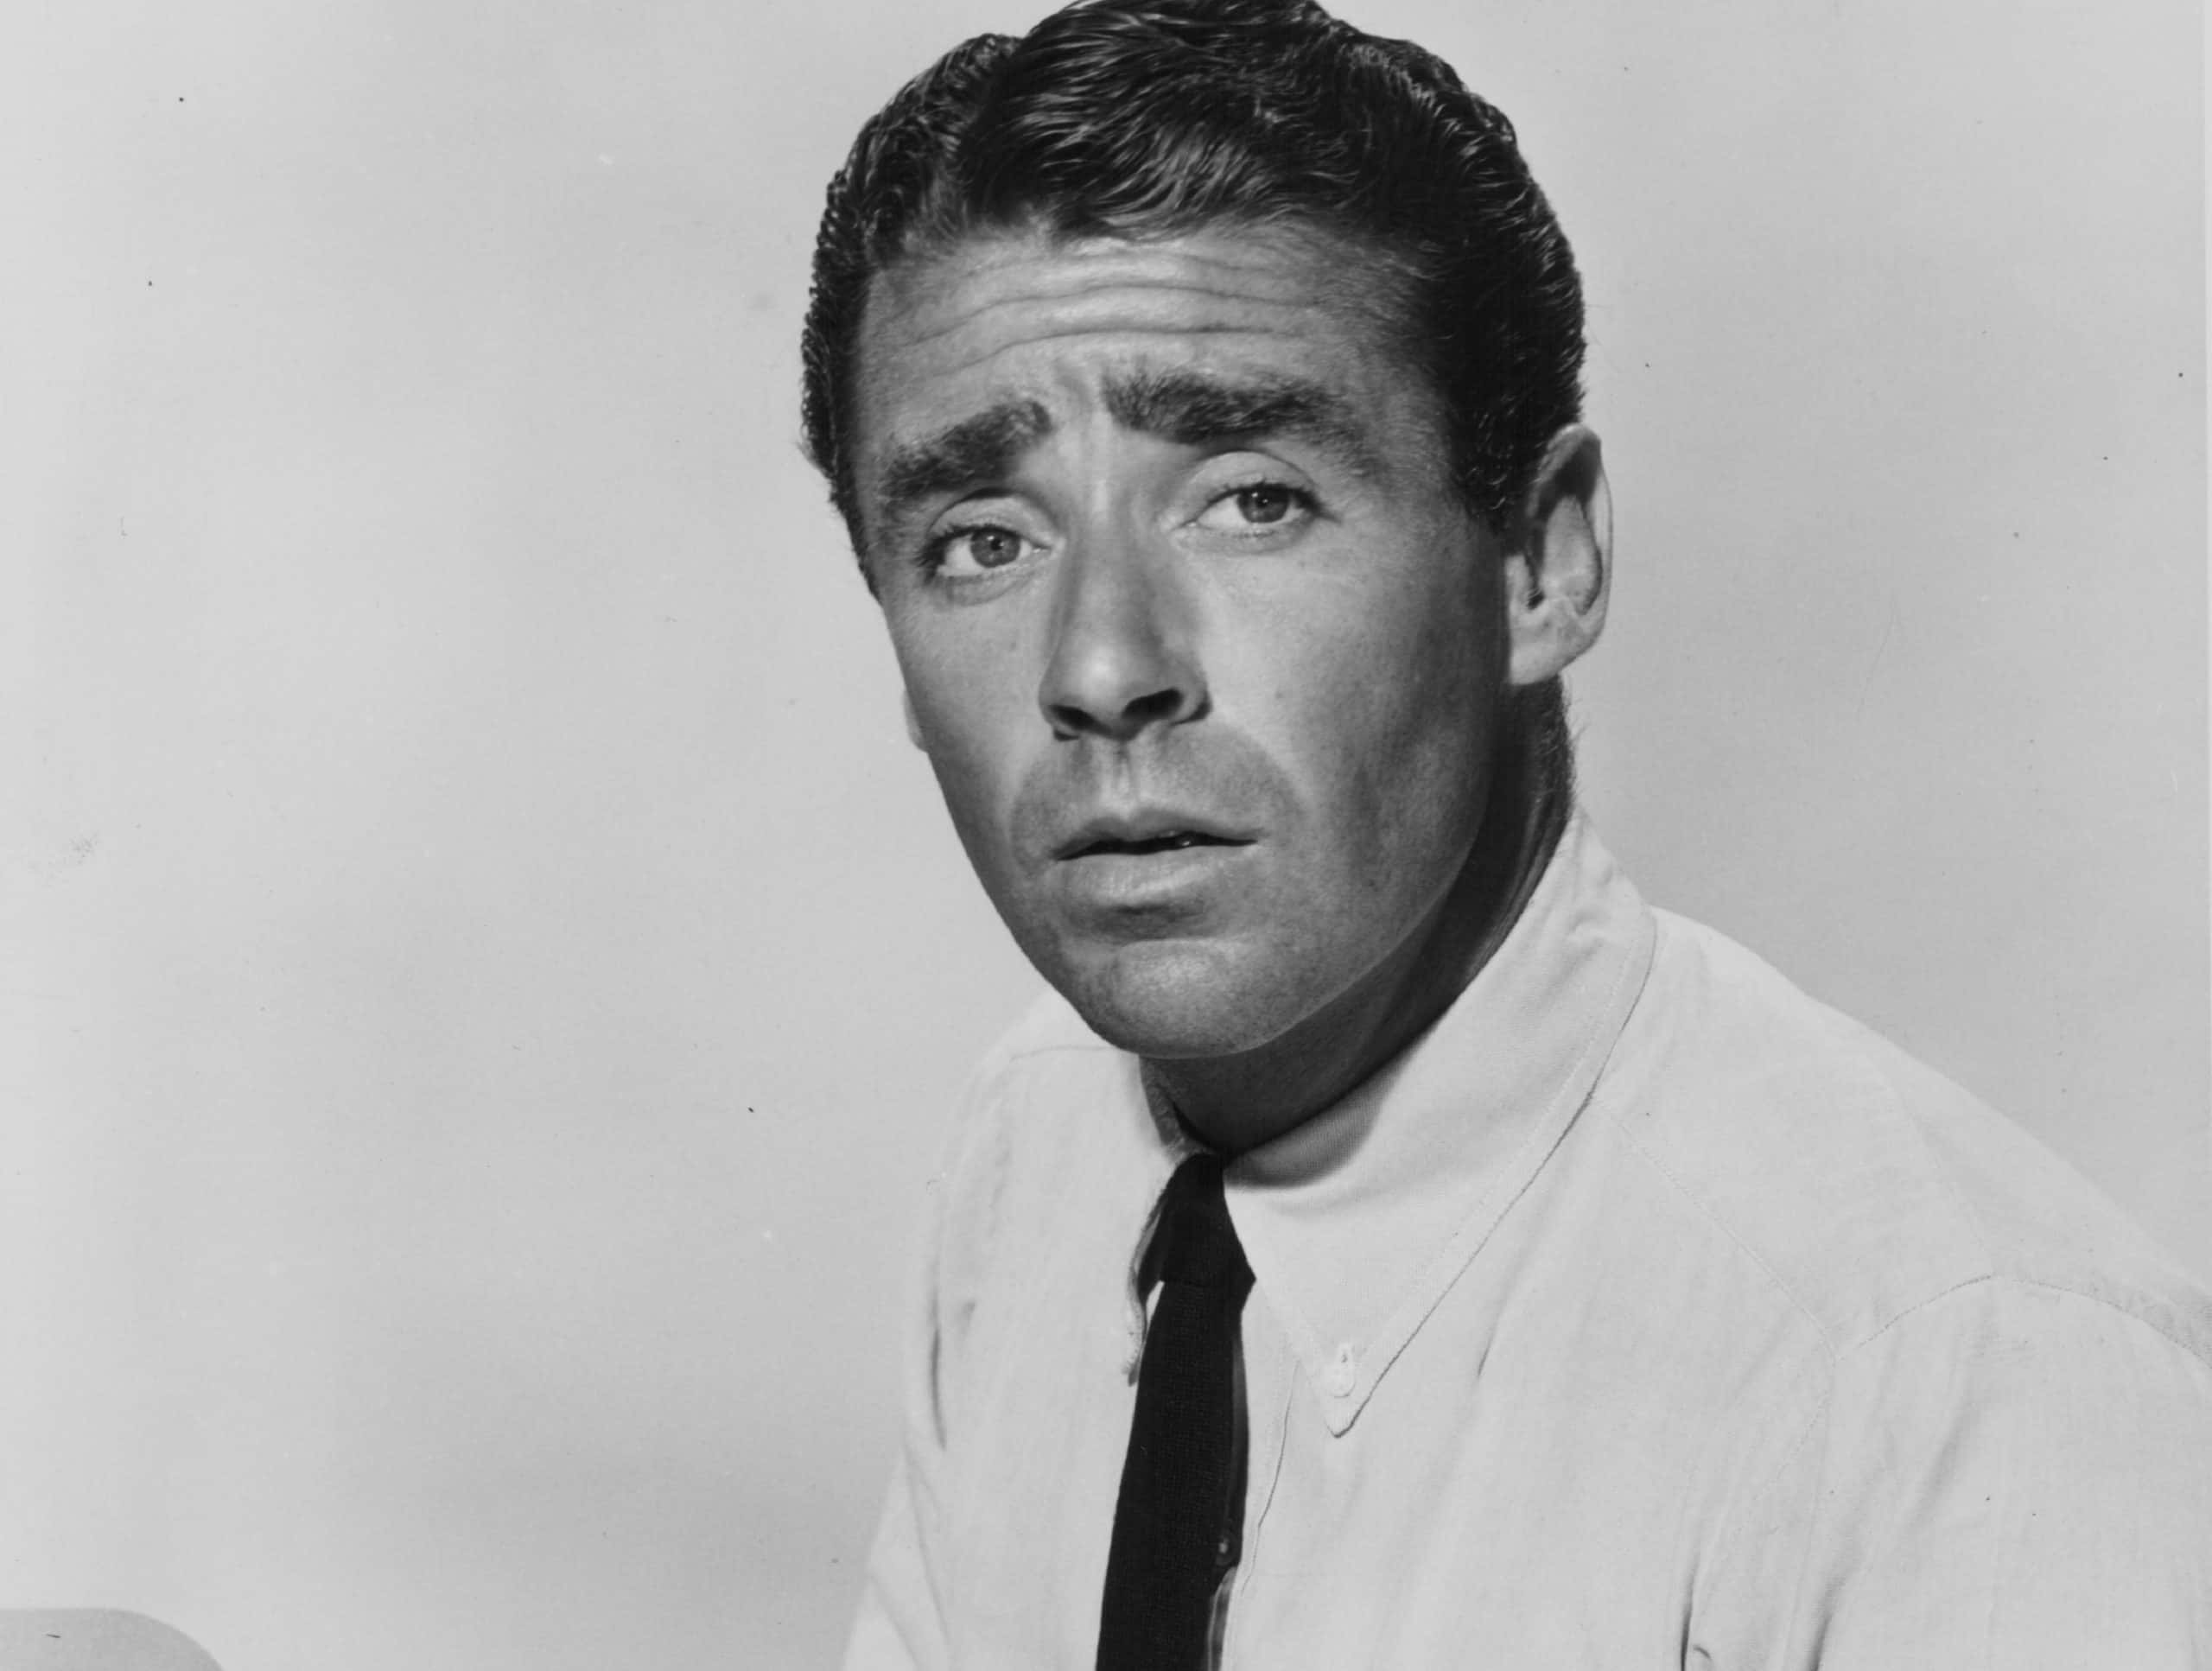 Peter Lawford facts